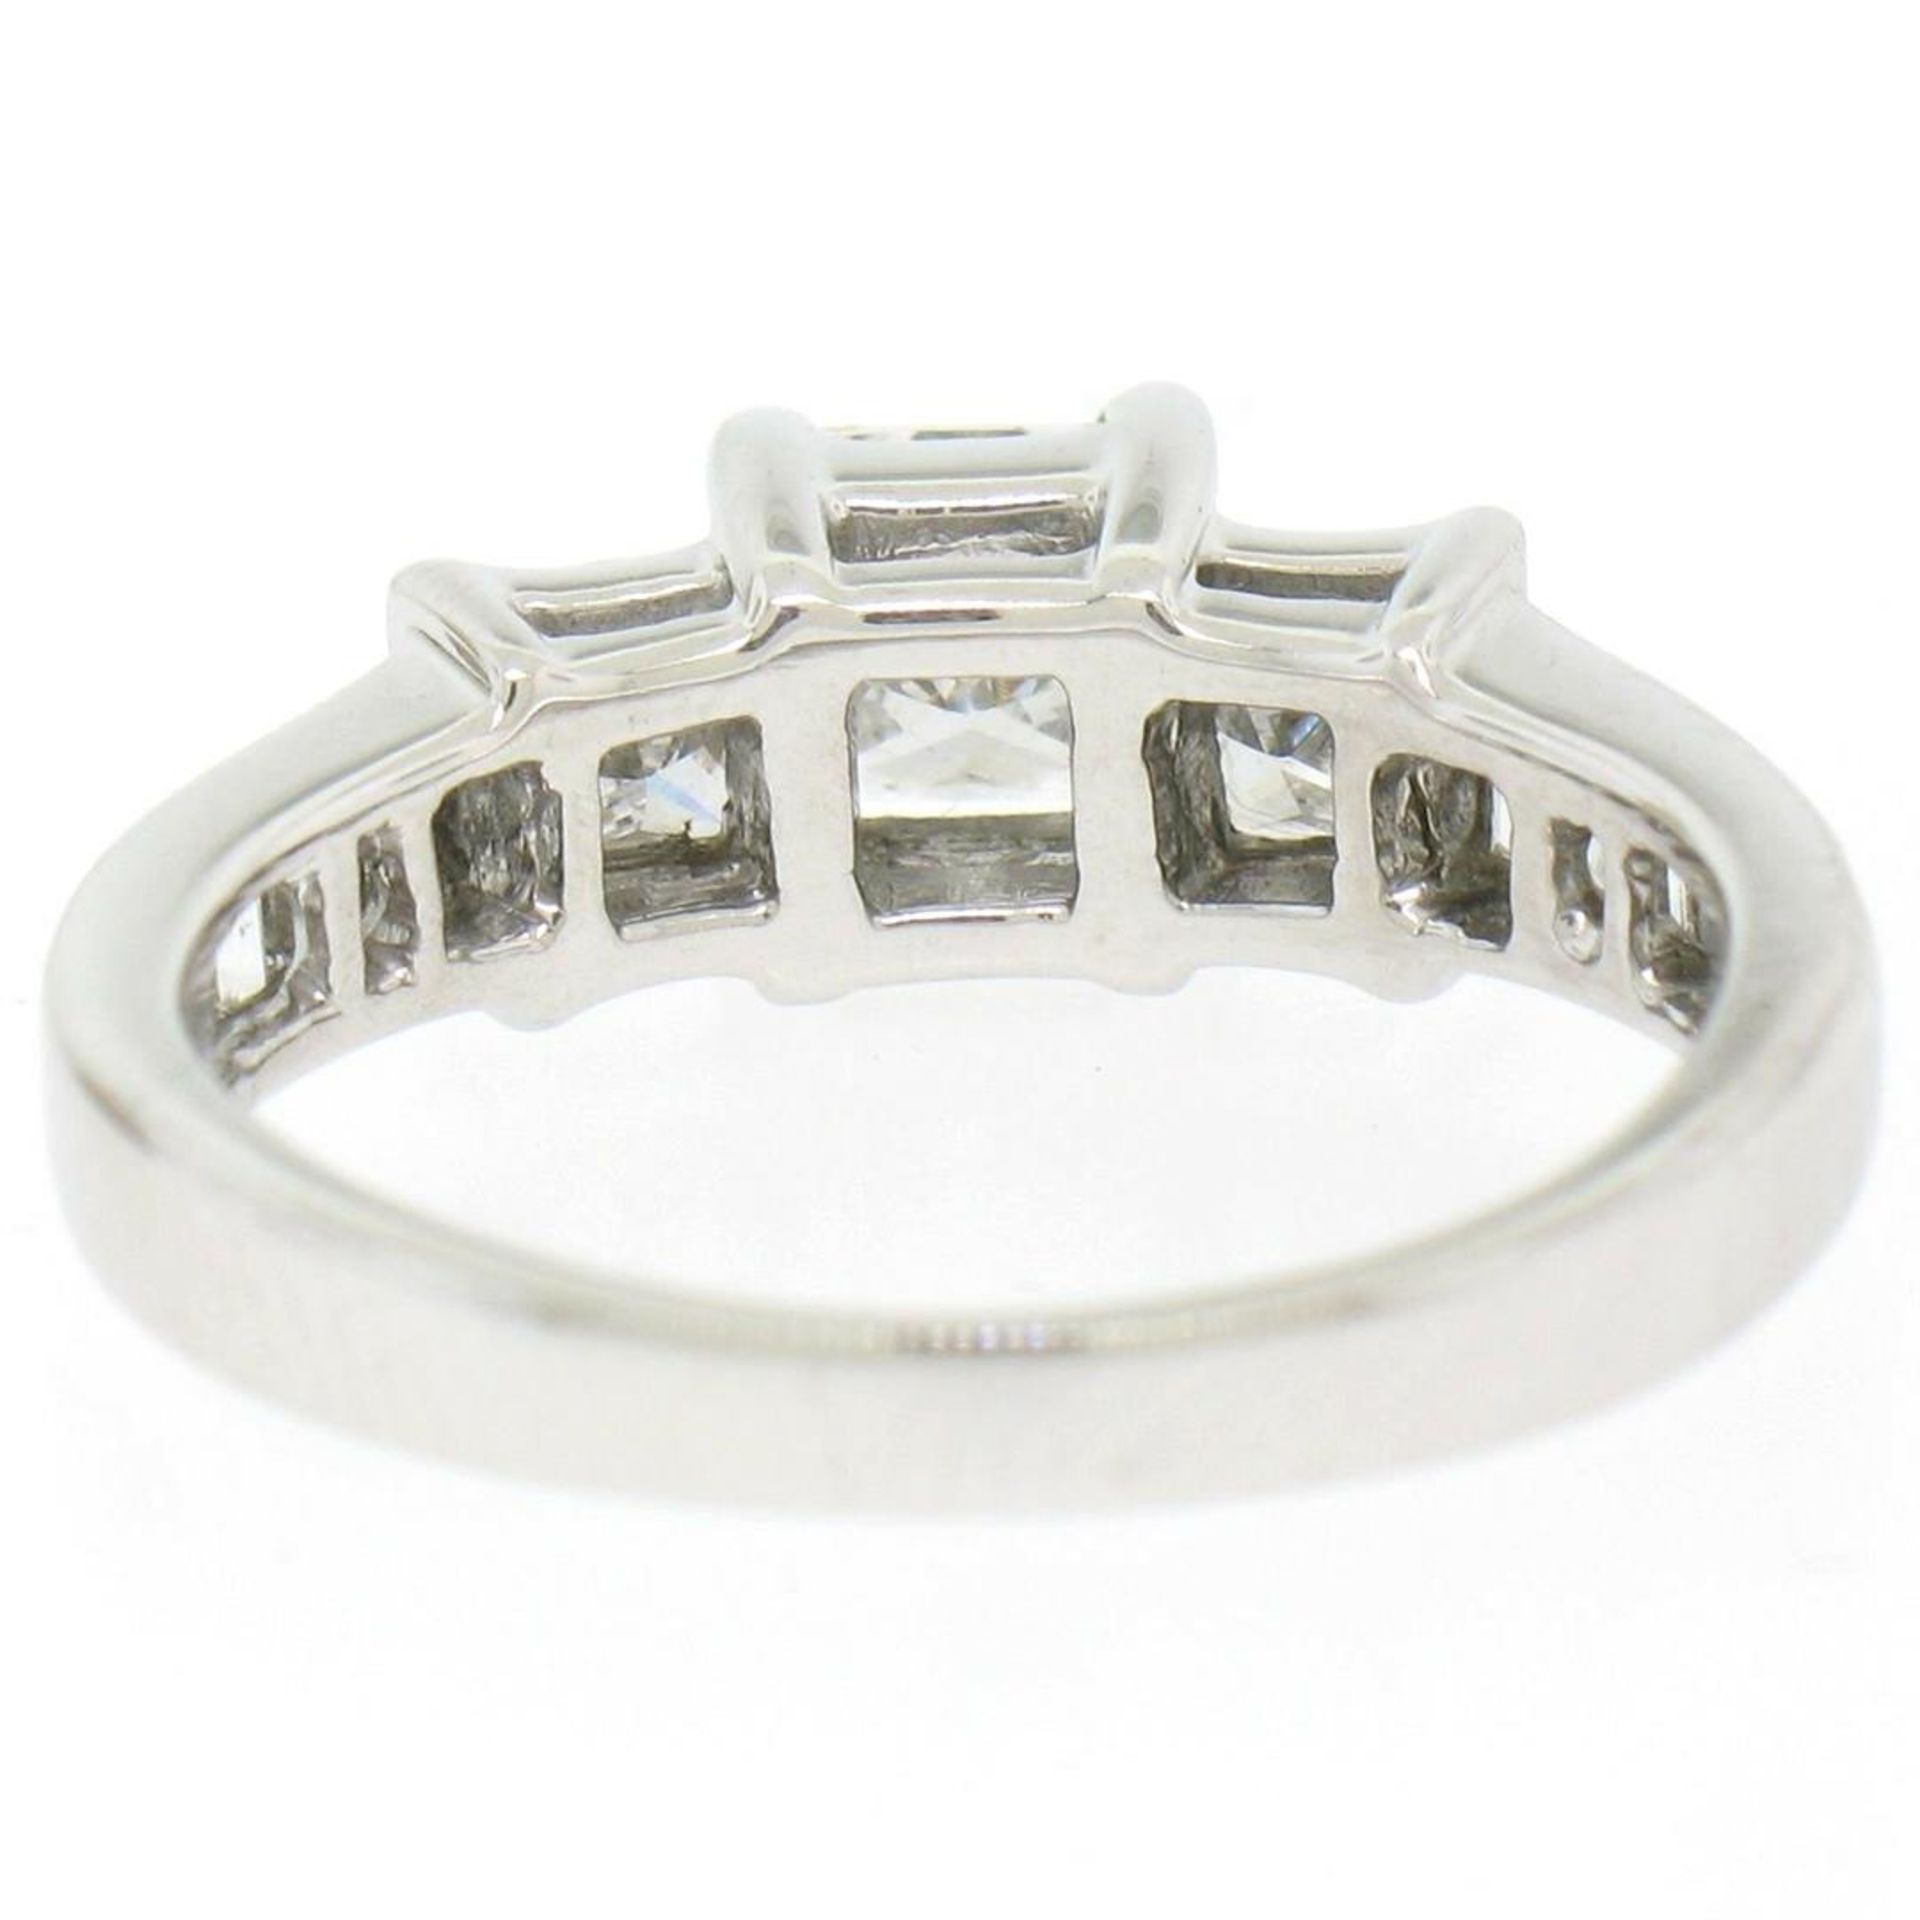 14k White Gold 1.45 ctw 3 Princess Diamond Engagement Ring w/ Baguette Accents - Image 17 of 18